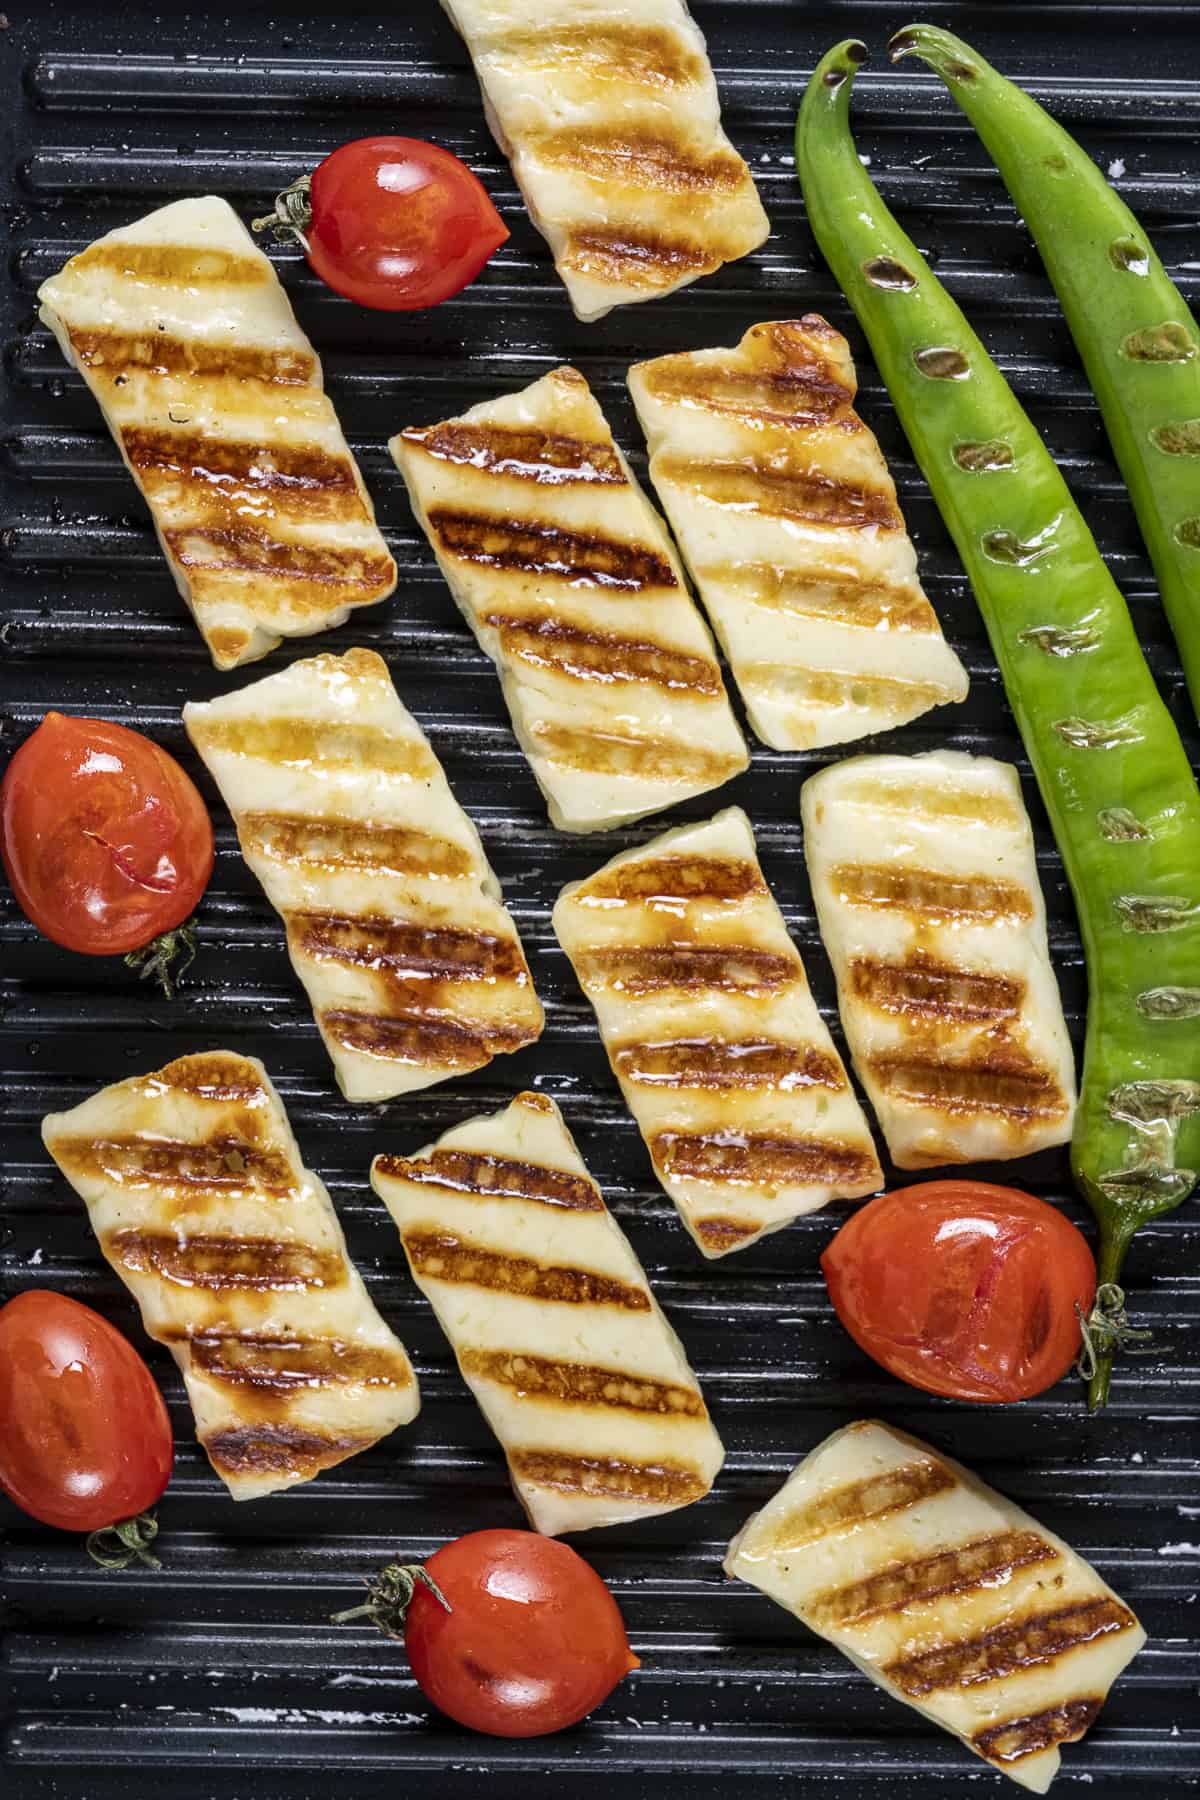 Halloumi slices, cherry tomatoes and green peppers on the grill.